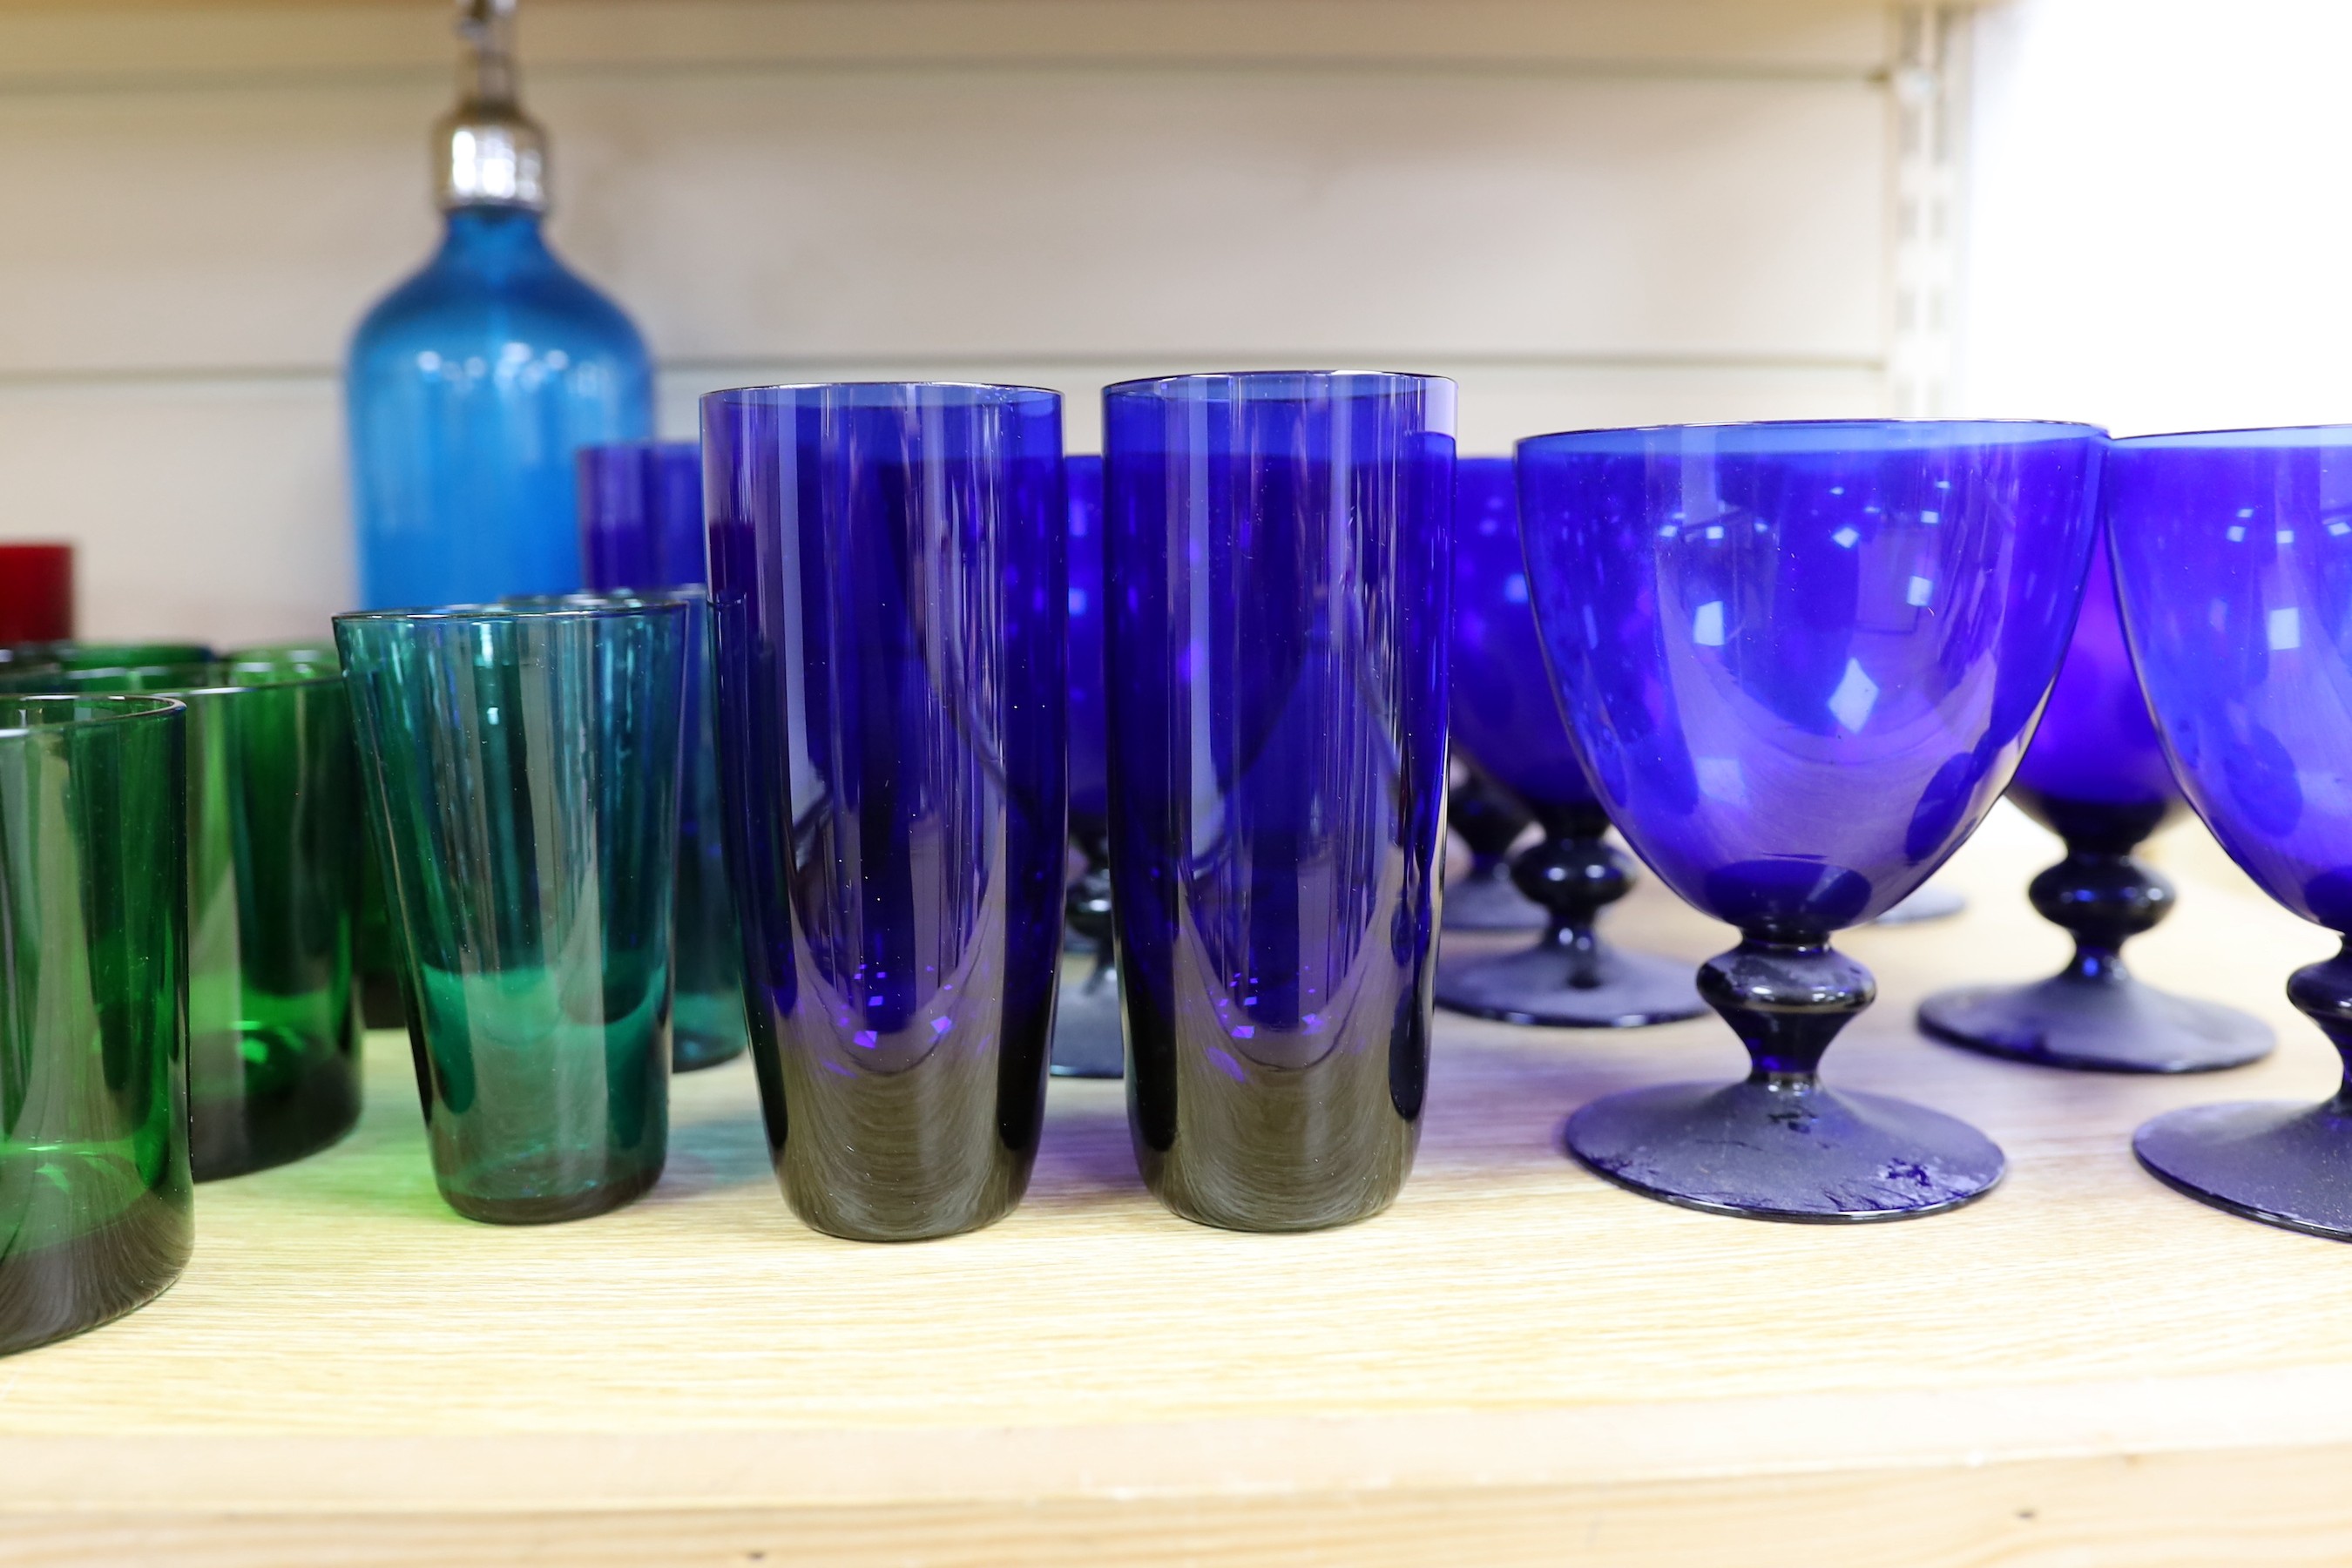 A mixed selection coloured glass wares